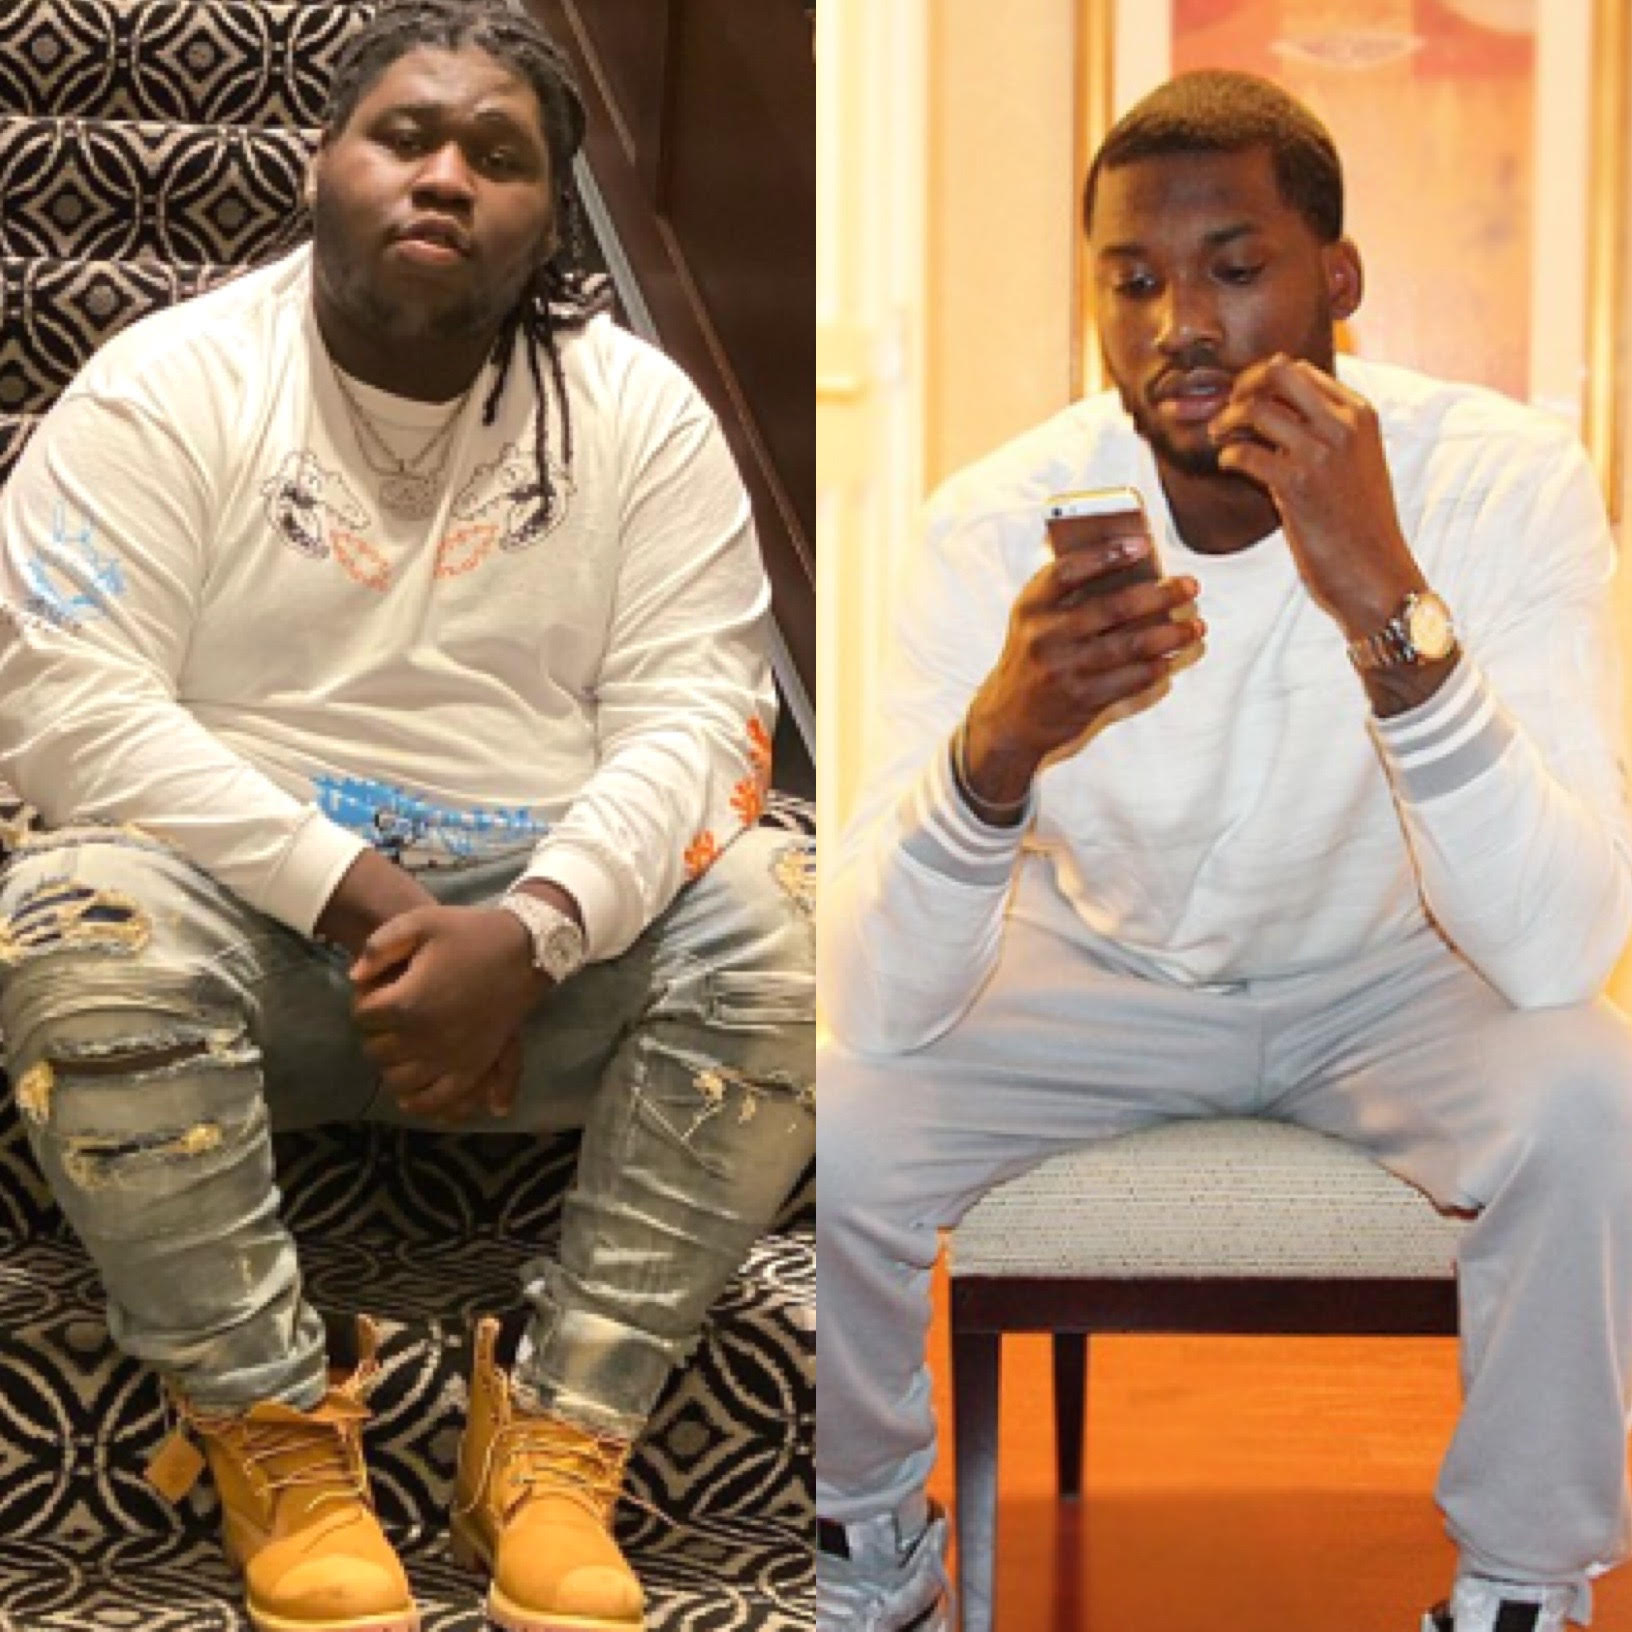 Who Has The Better Shoe Style: Drake Or Meek Mill? – Footwear News